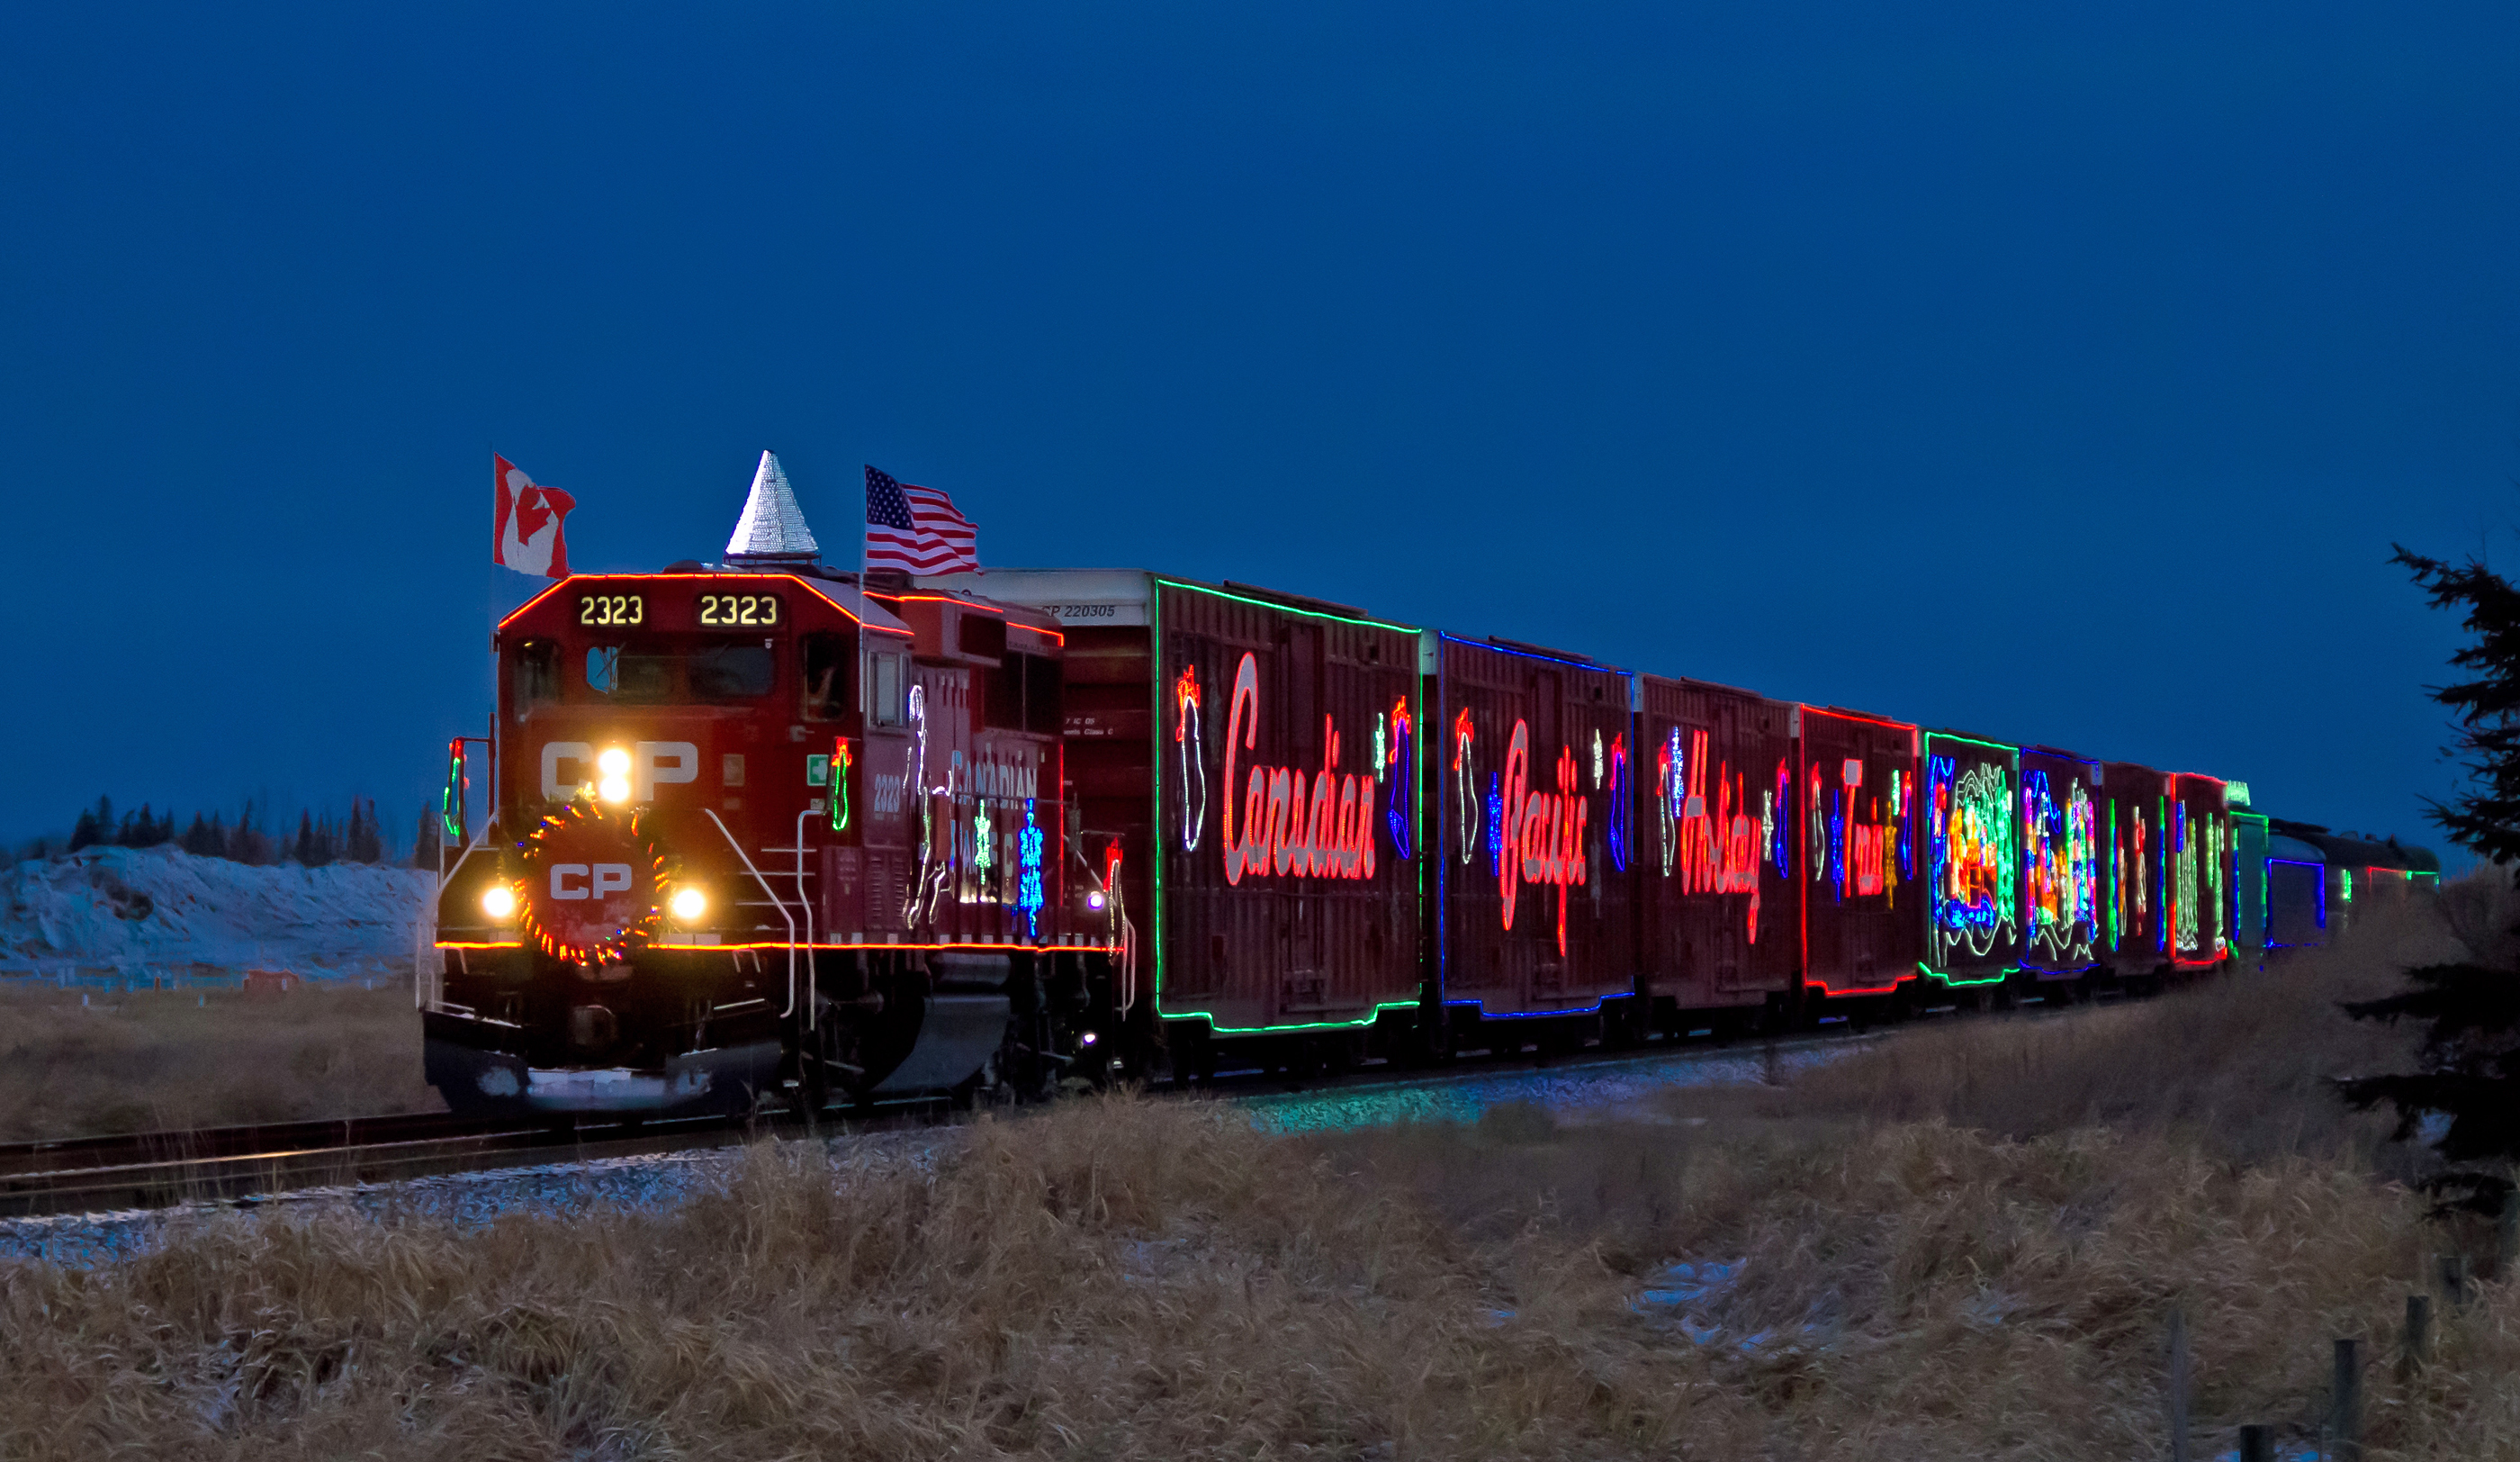 Railpictures.ca colin arnot Photo CP’s 2016 Holiday Train enters